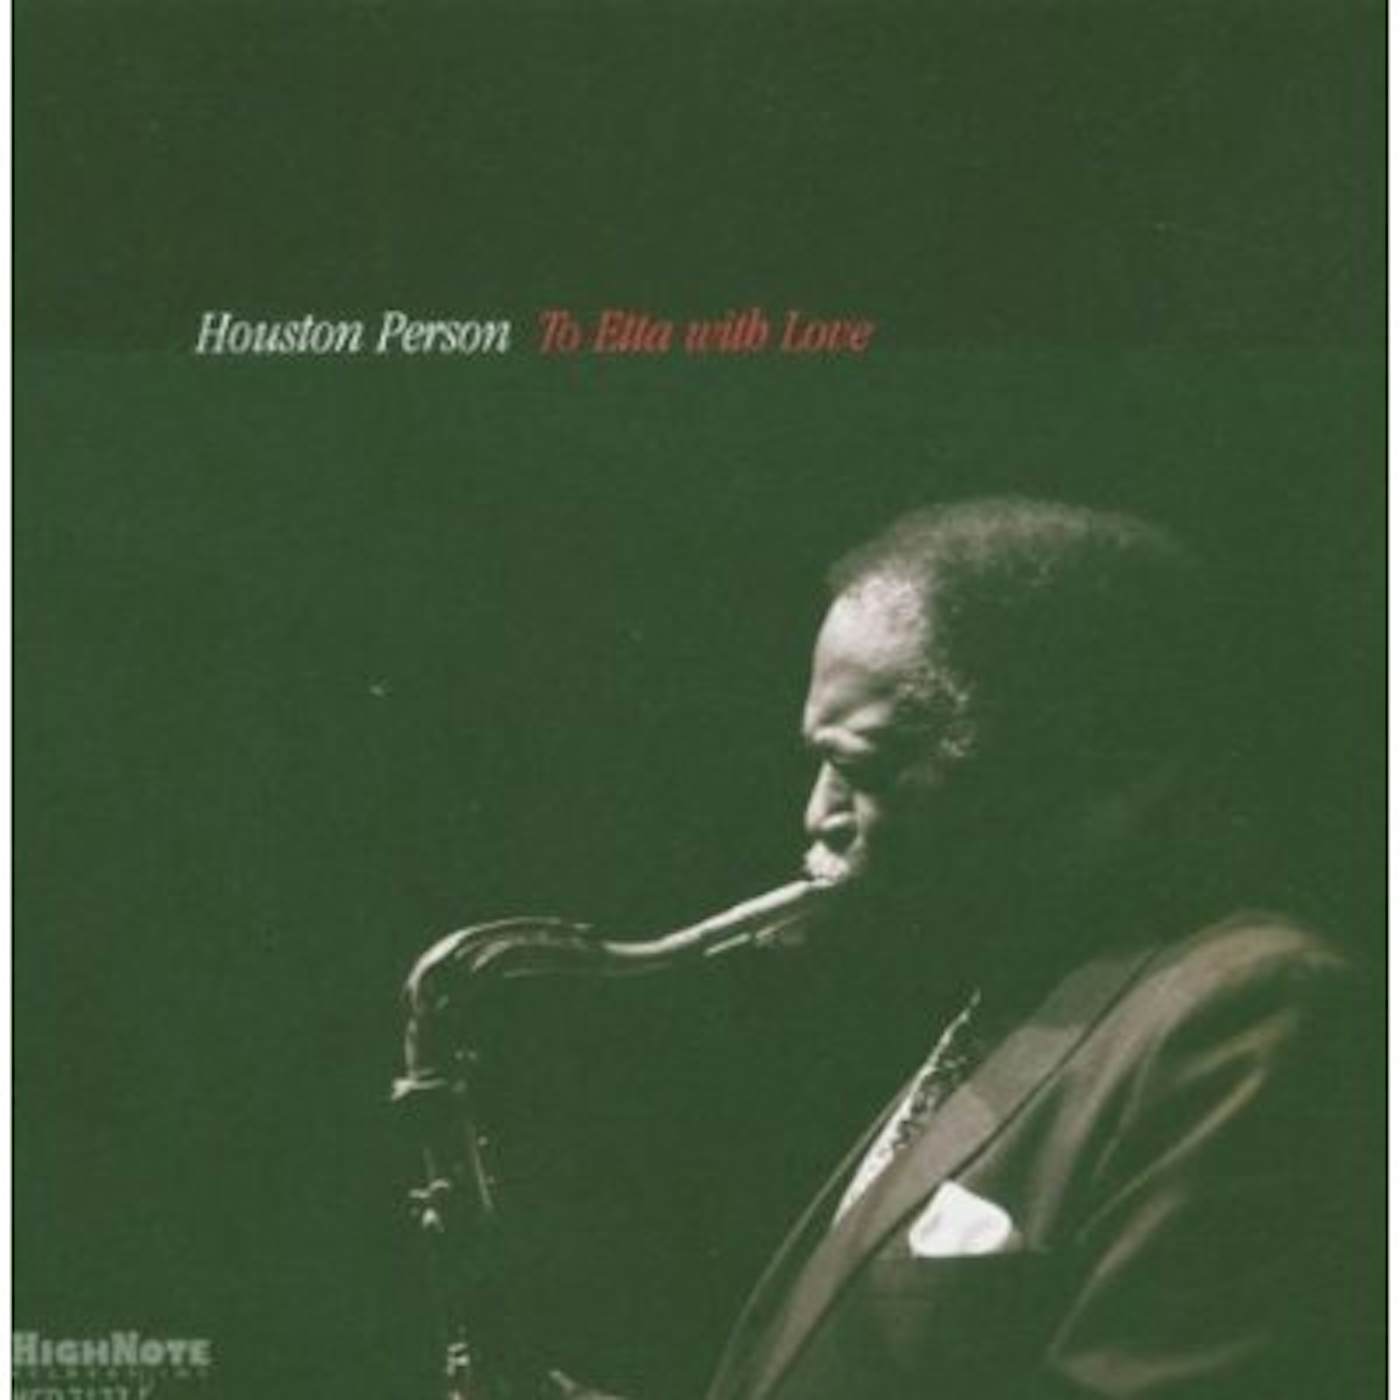 Houston Person TO ETTA WITH LOVE CD